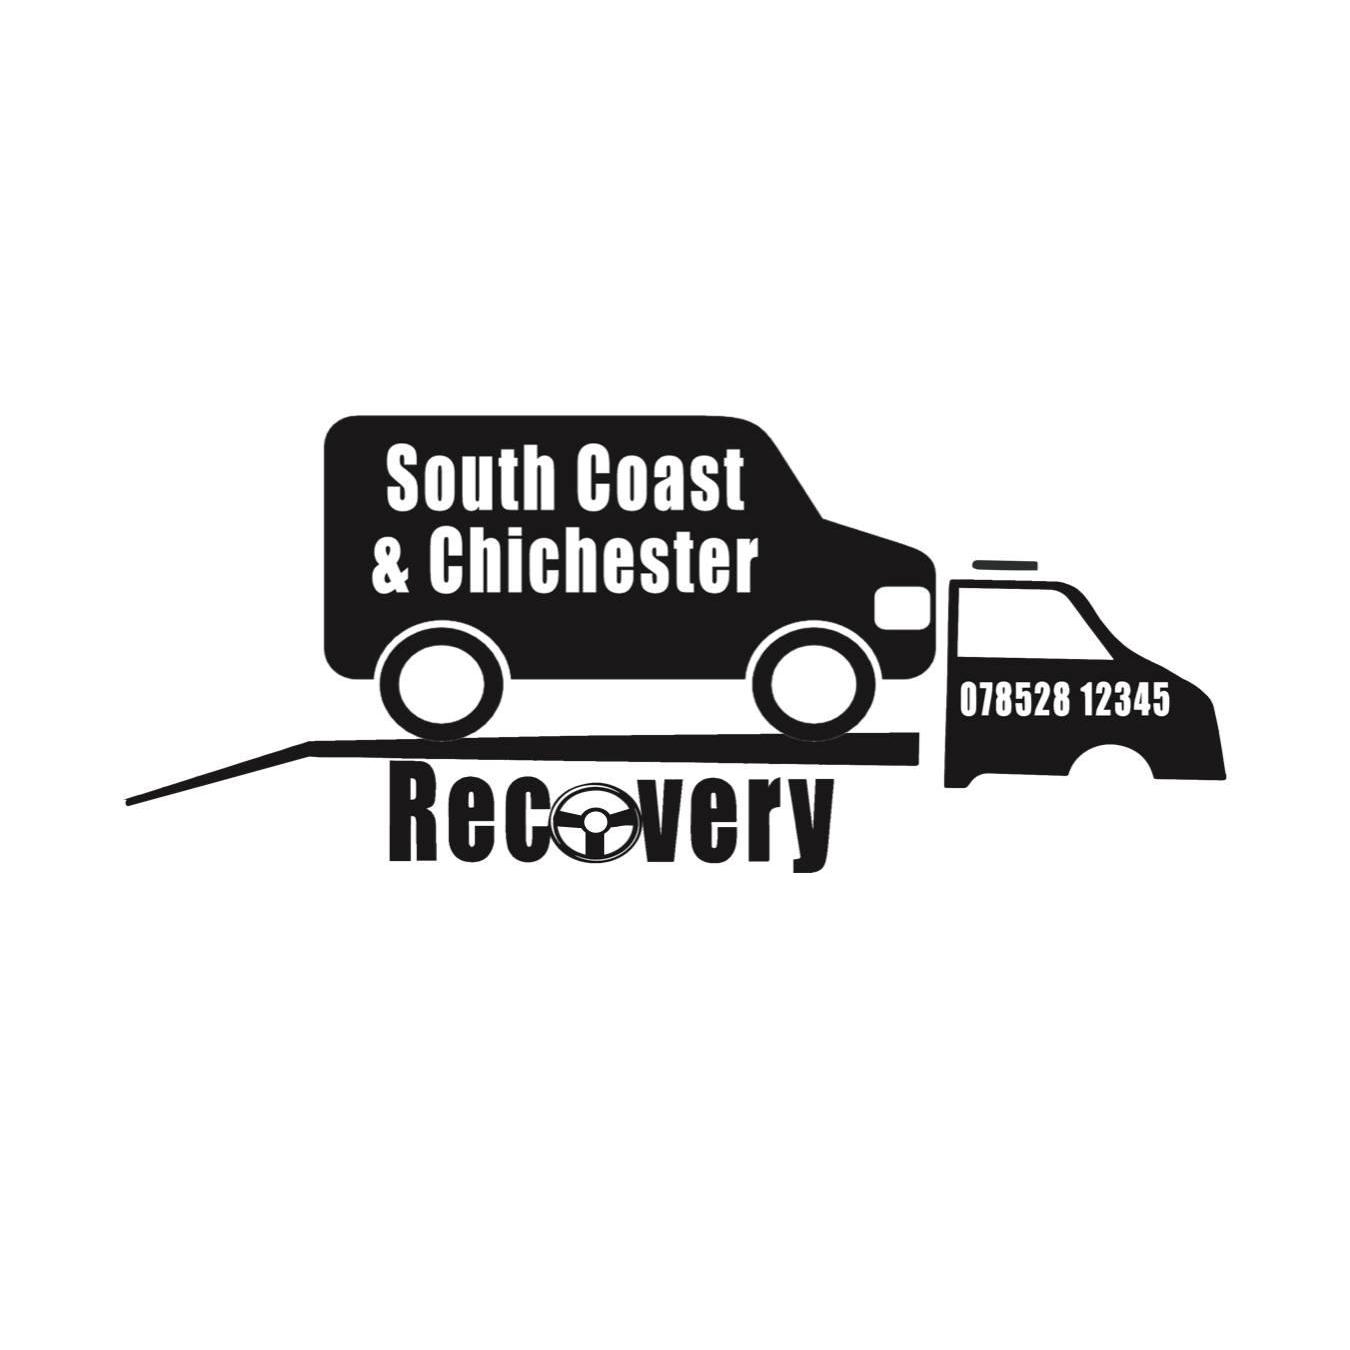 South Coast & Chichester Recovery Services Logo